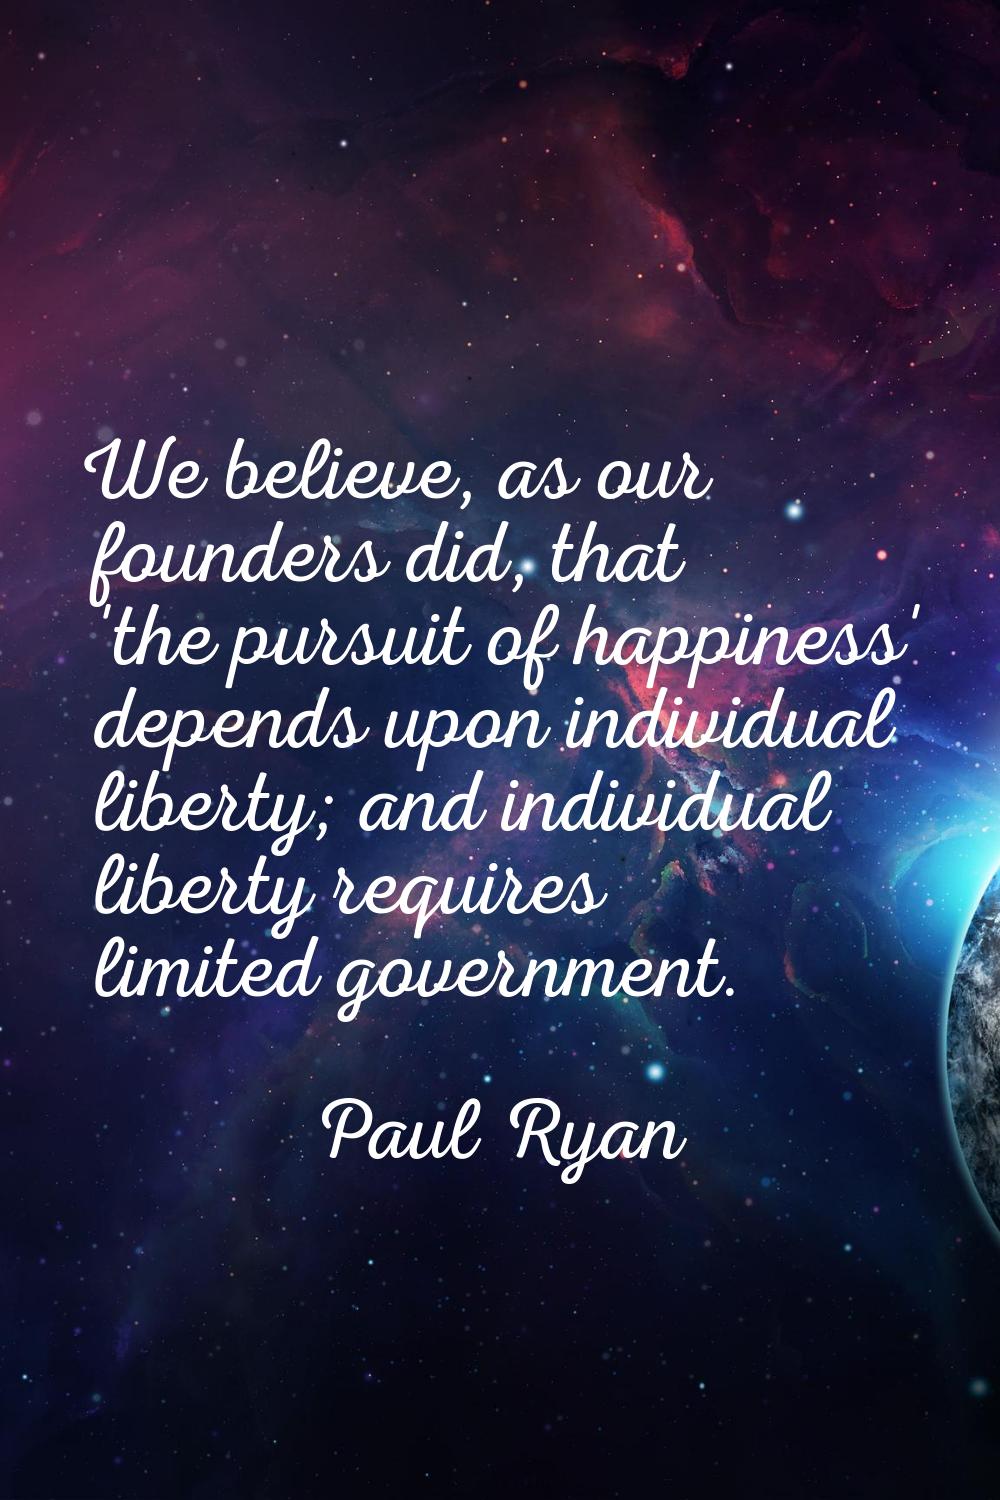 We believe, as our founders did, that 'the pursuit of happiness' depends upon individual liberty; a